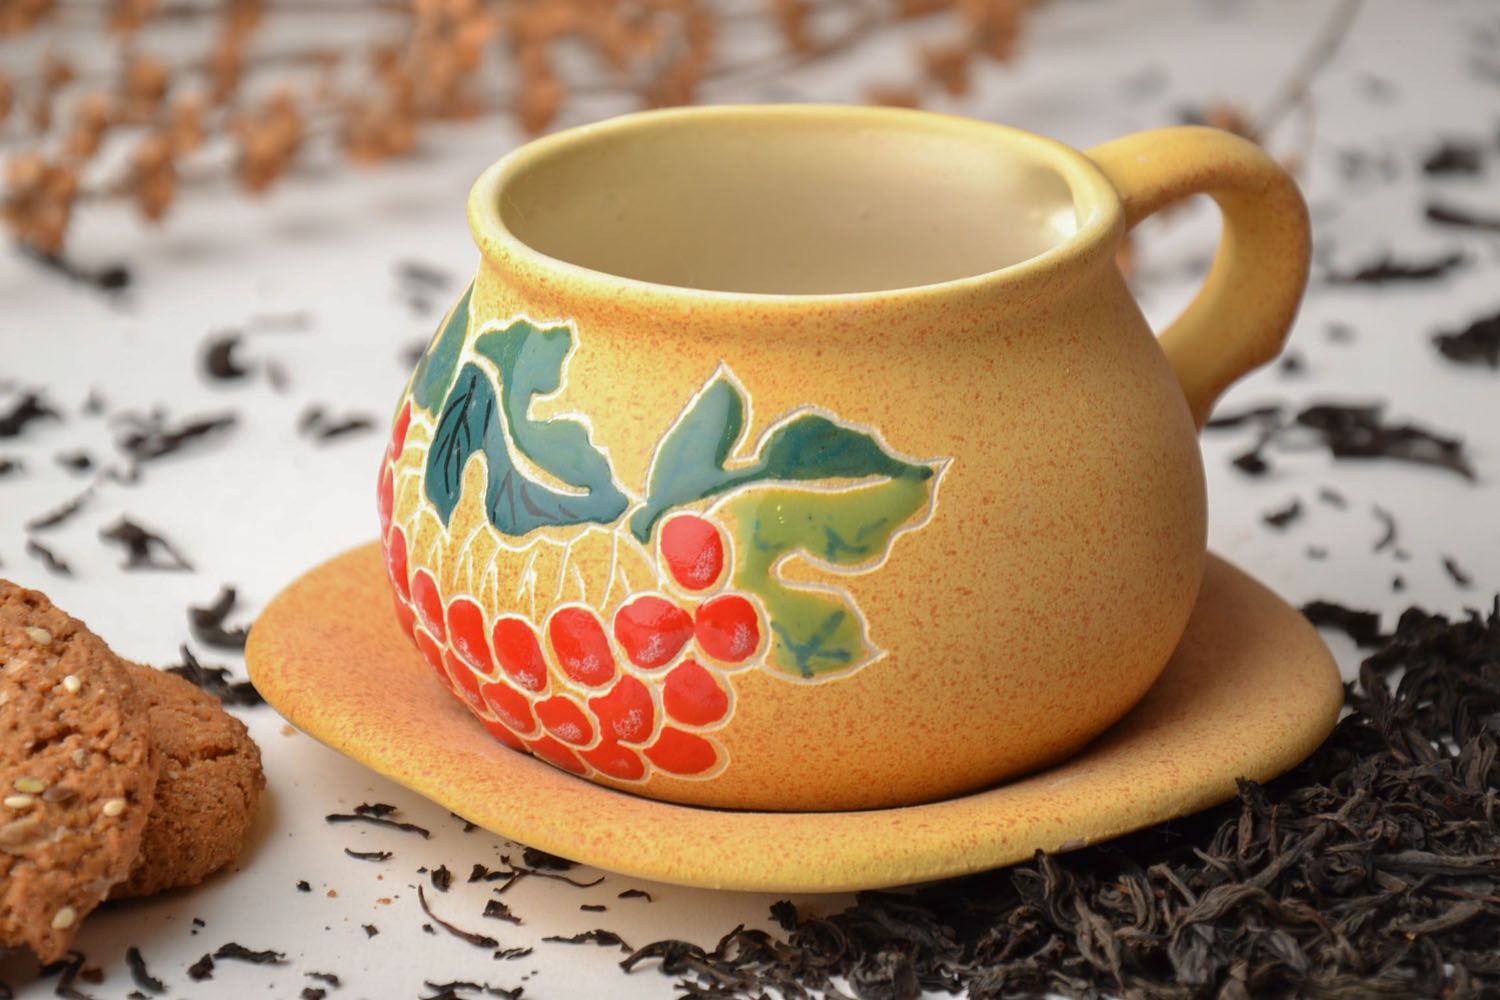 Pot shape clay 5 oz cup for coffee or tea with saucer and handle. Floral red poppies pattern. photo 1